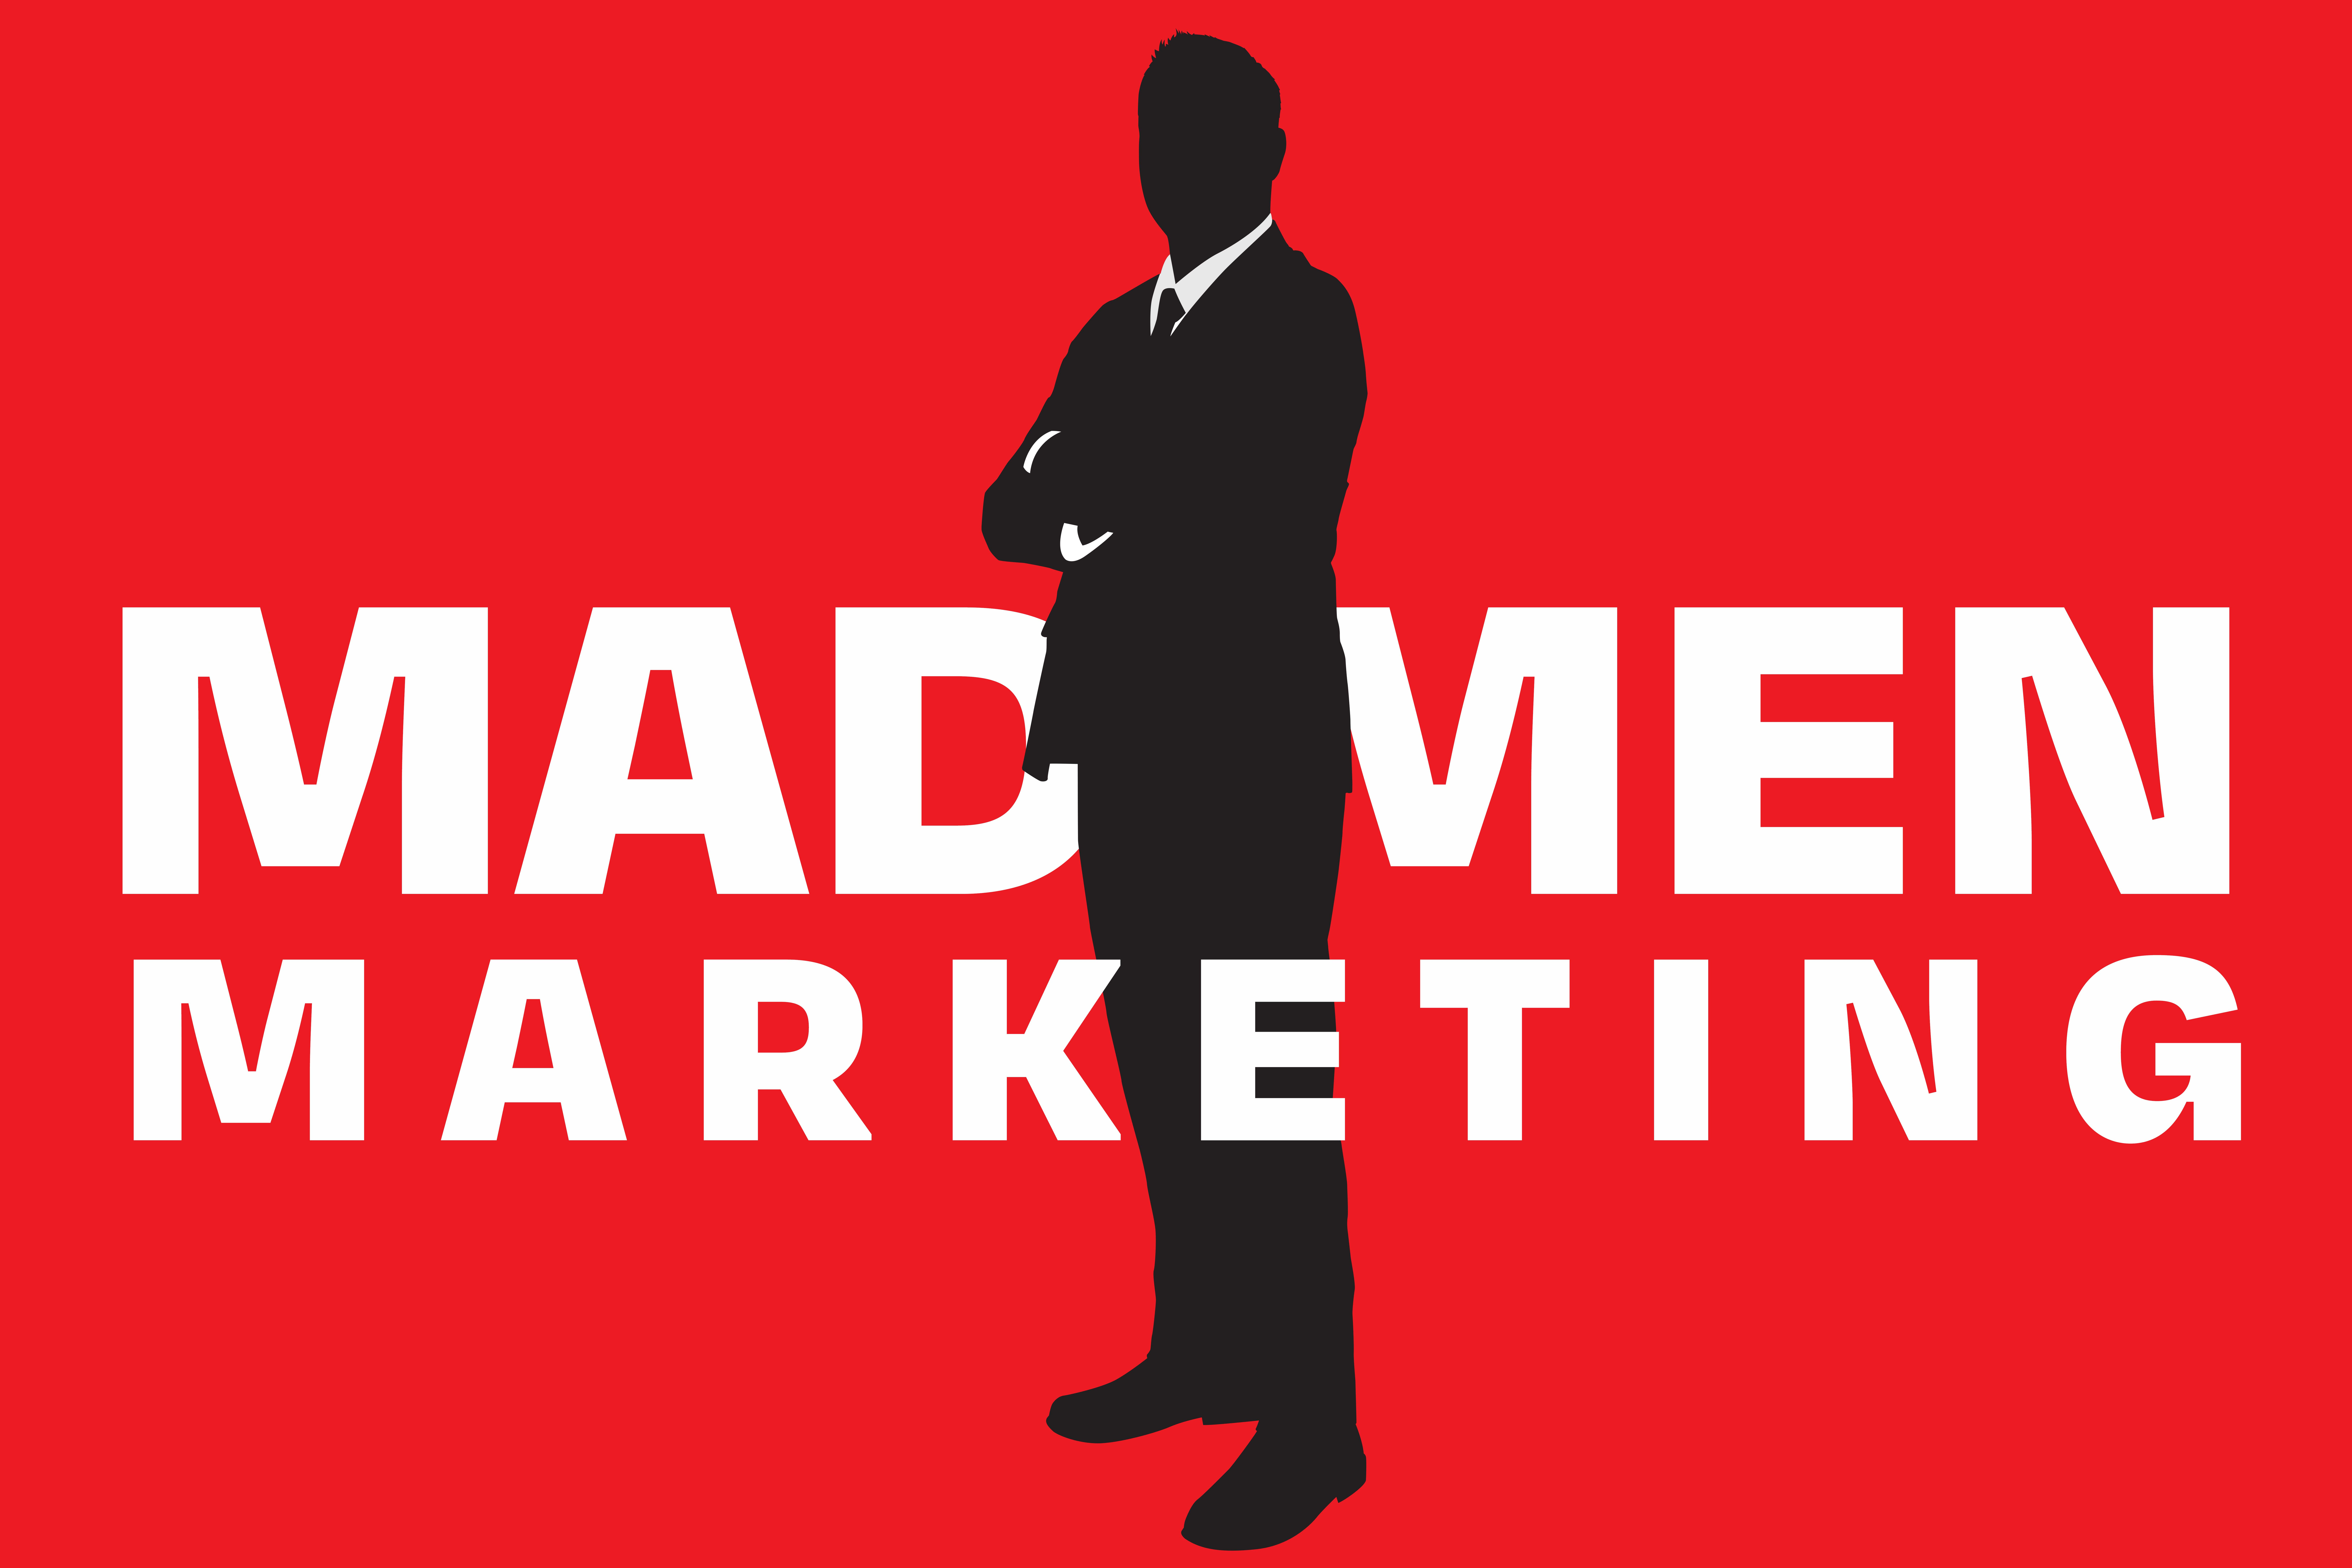 Why A ‘Mad Men’ Approach To Marketing Works